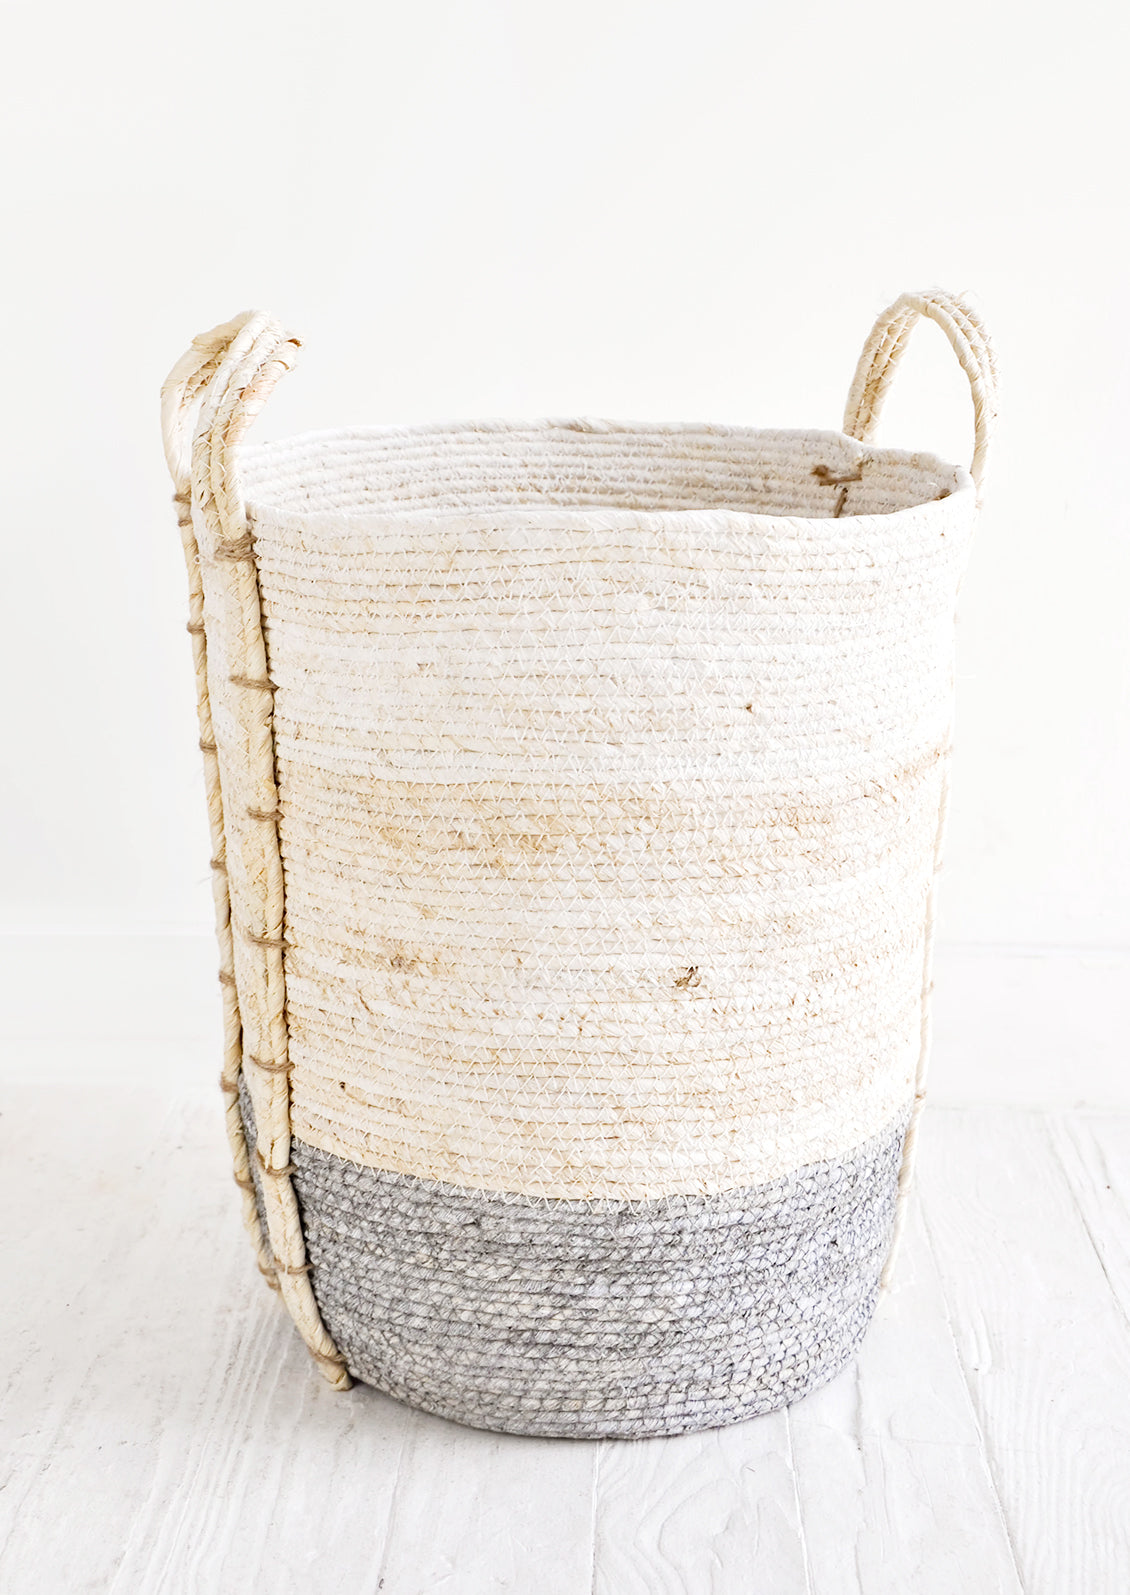 Round, tall storage basket made from natural maize fiber, fiber handles attached at sides, band of contrasting grey color along bottom.